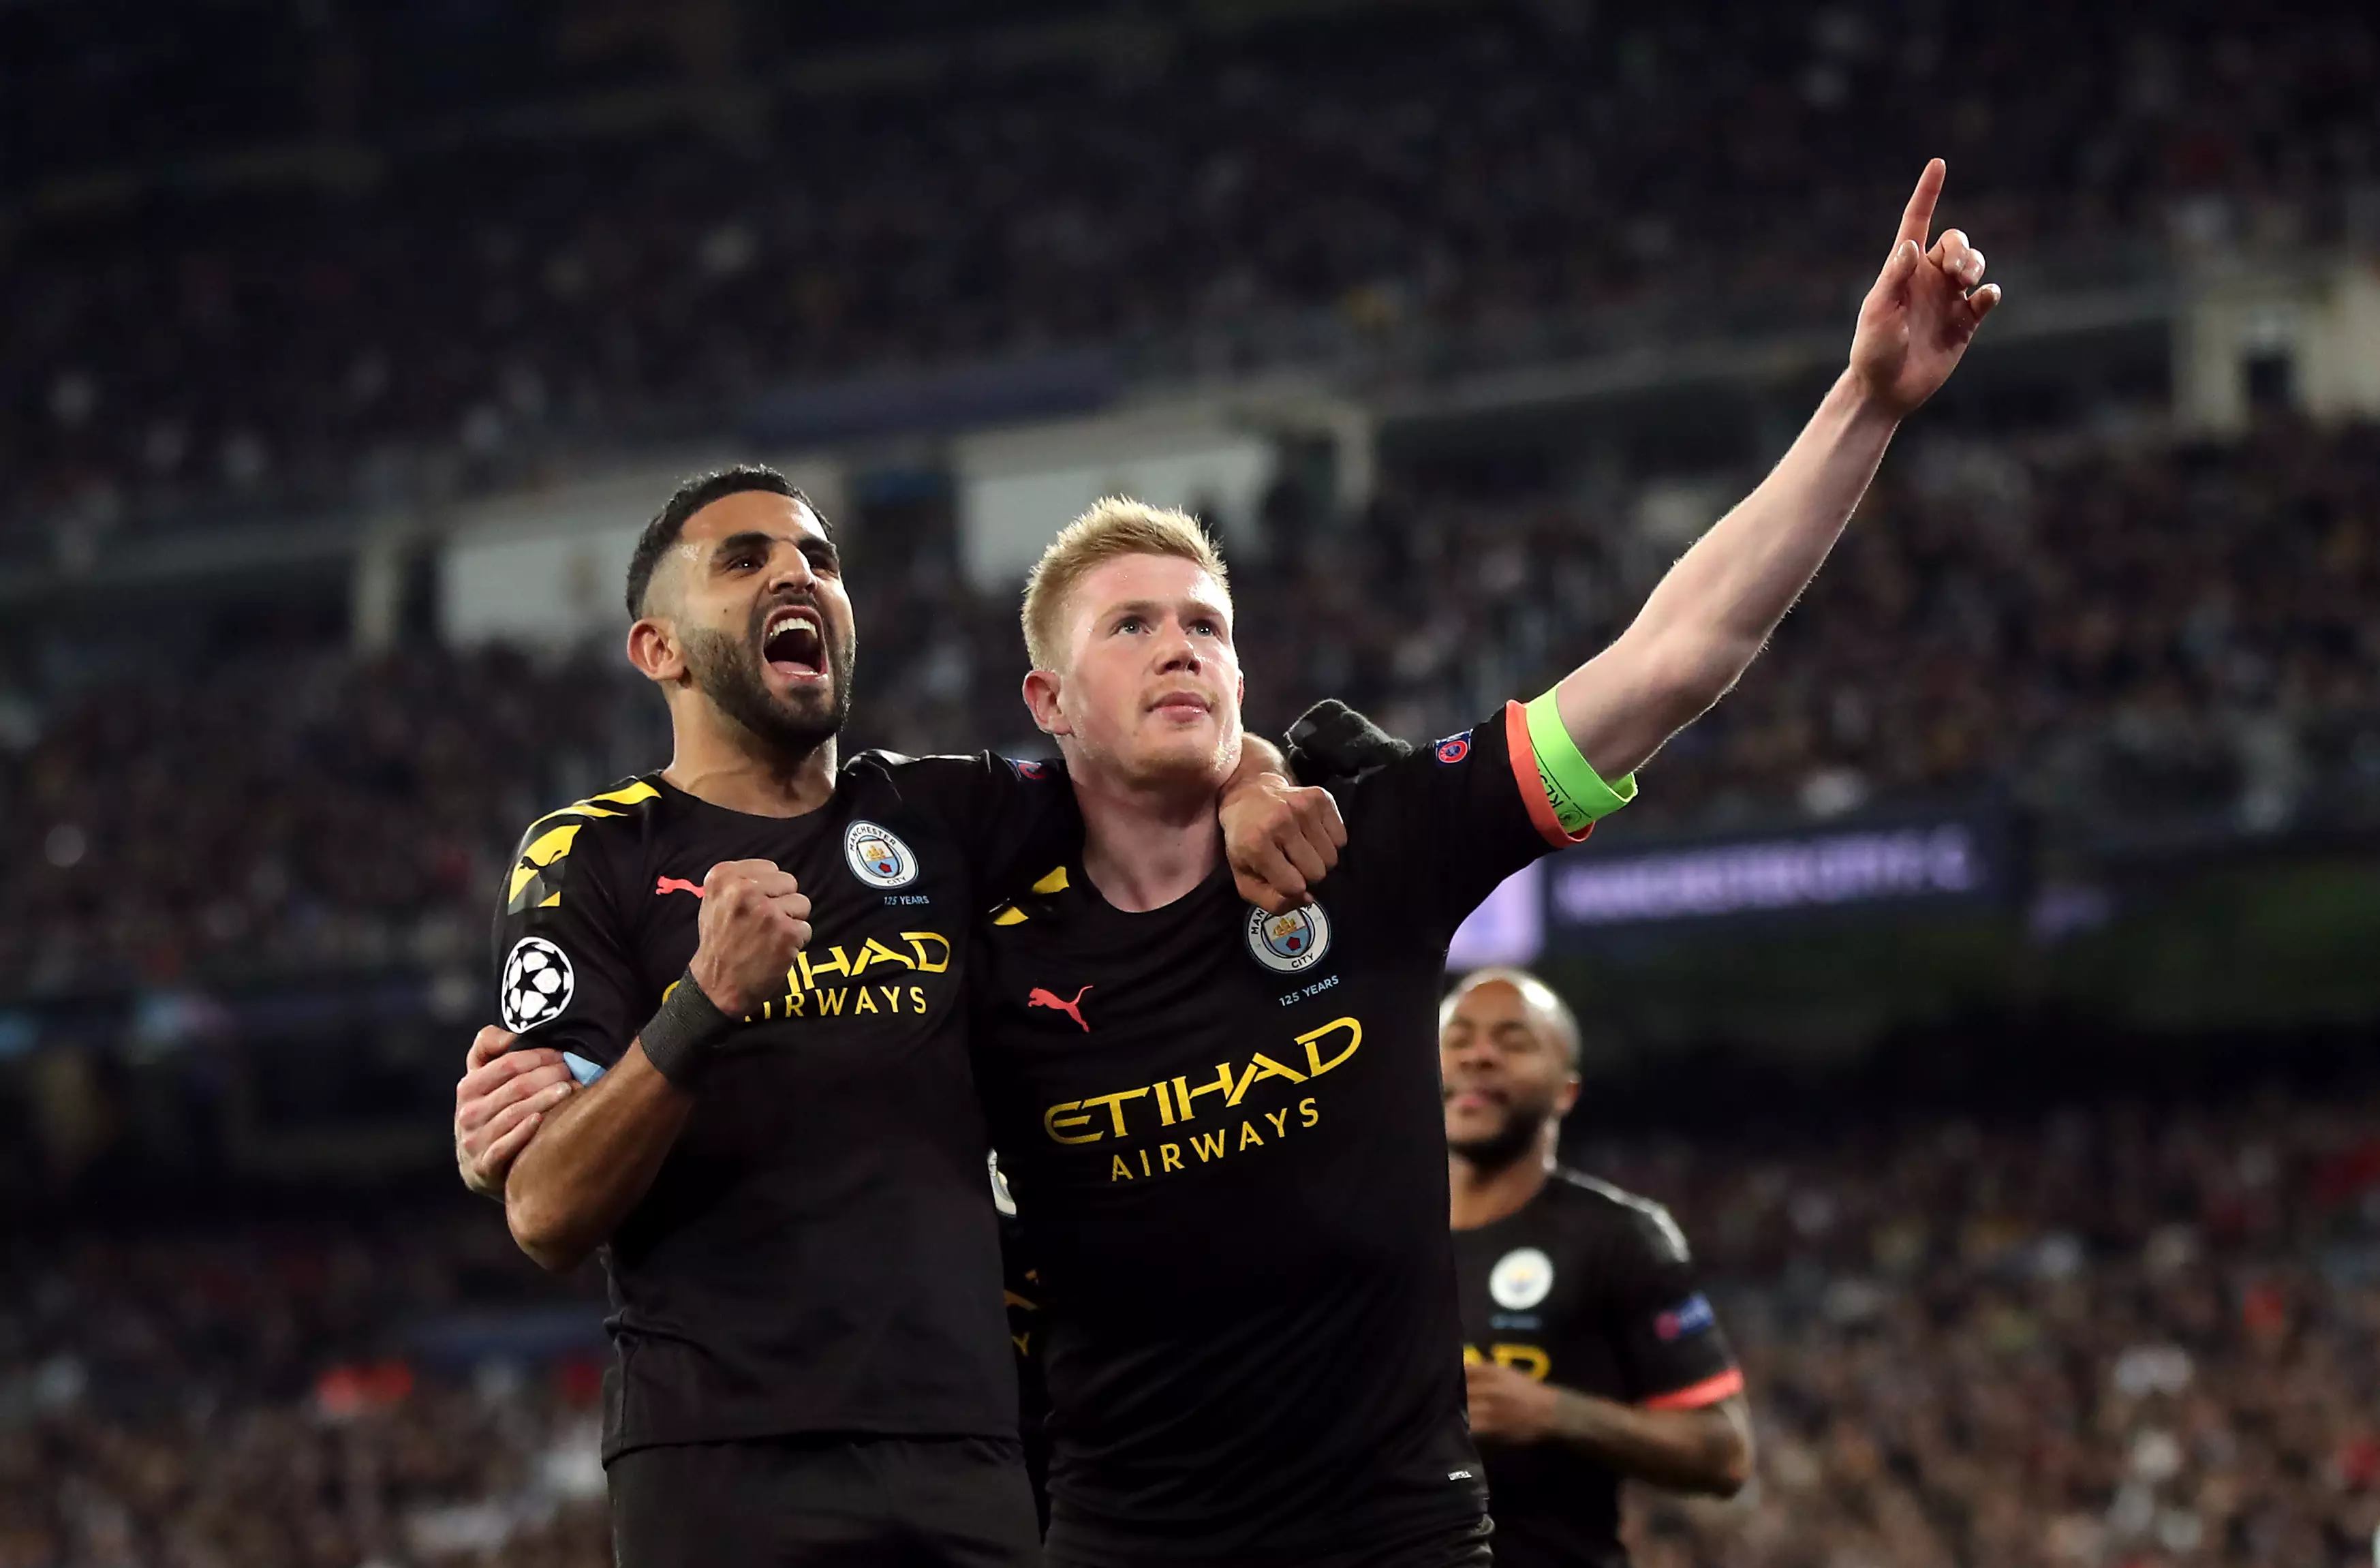 De Bruyne's been in excellent form this season. Image: PA Images